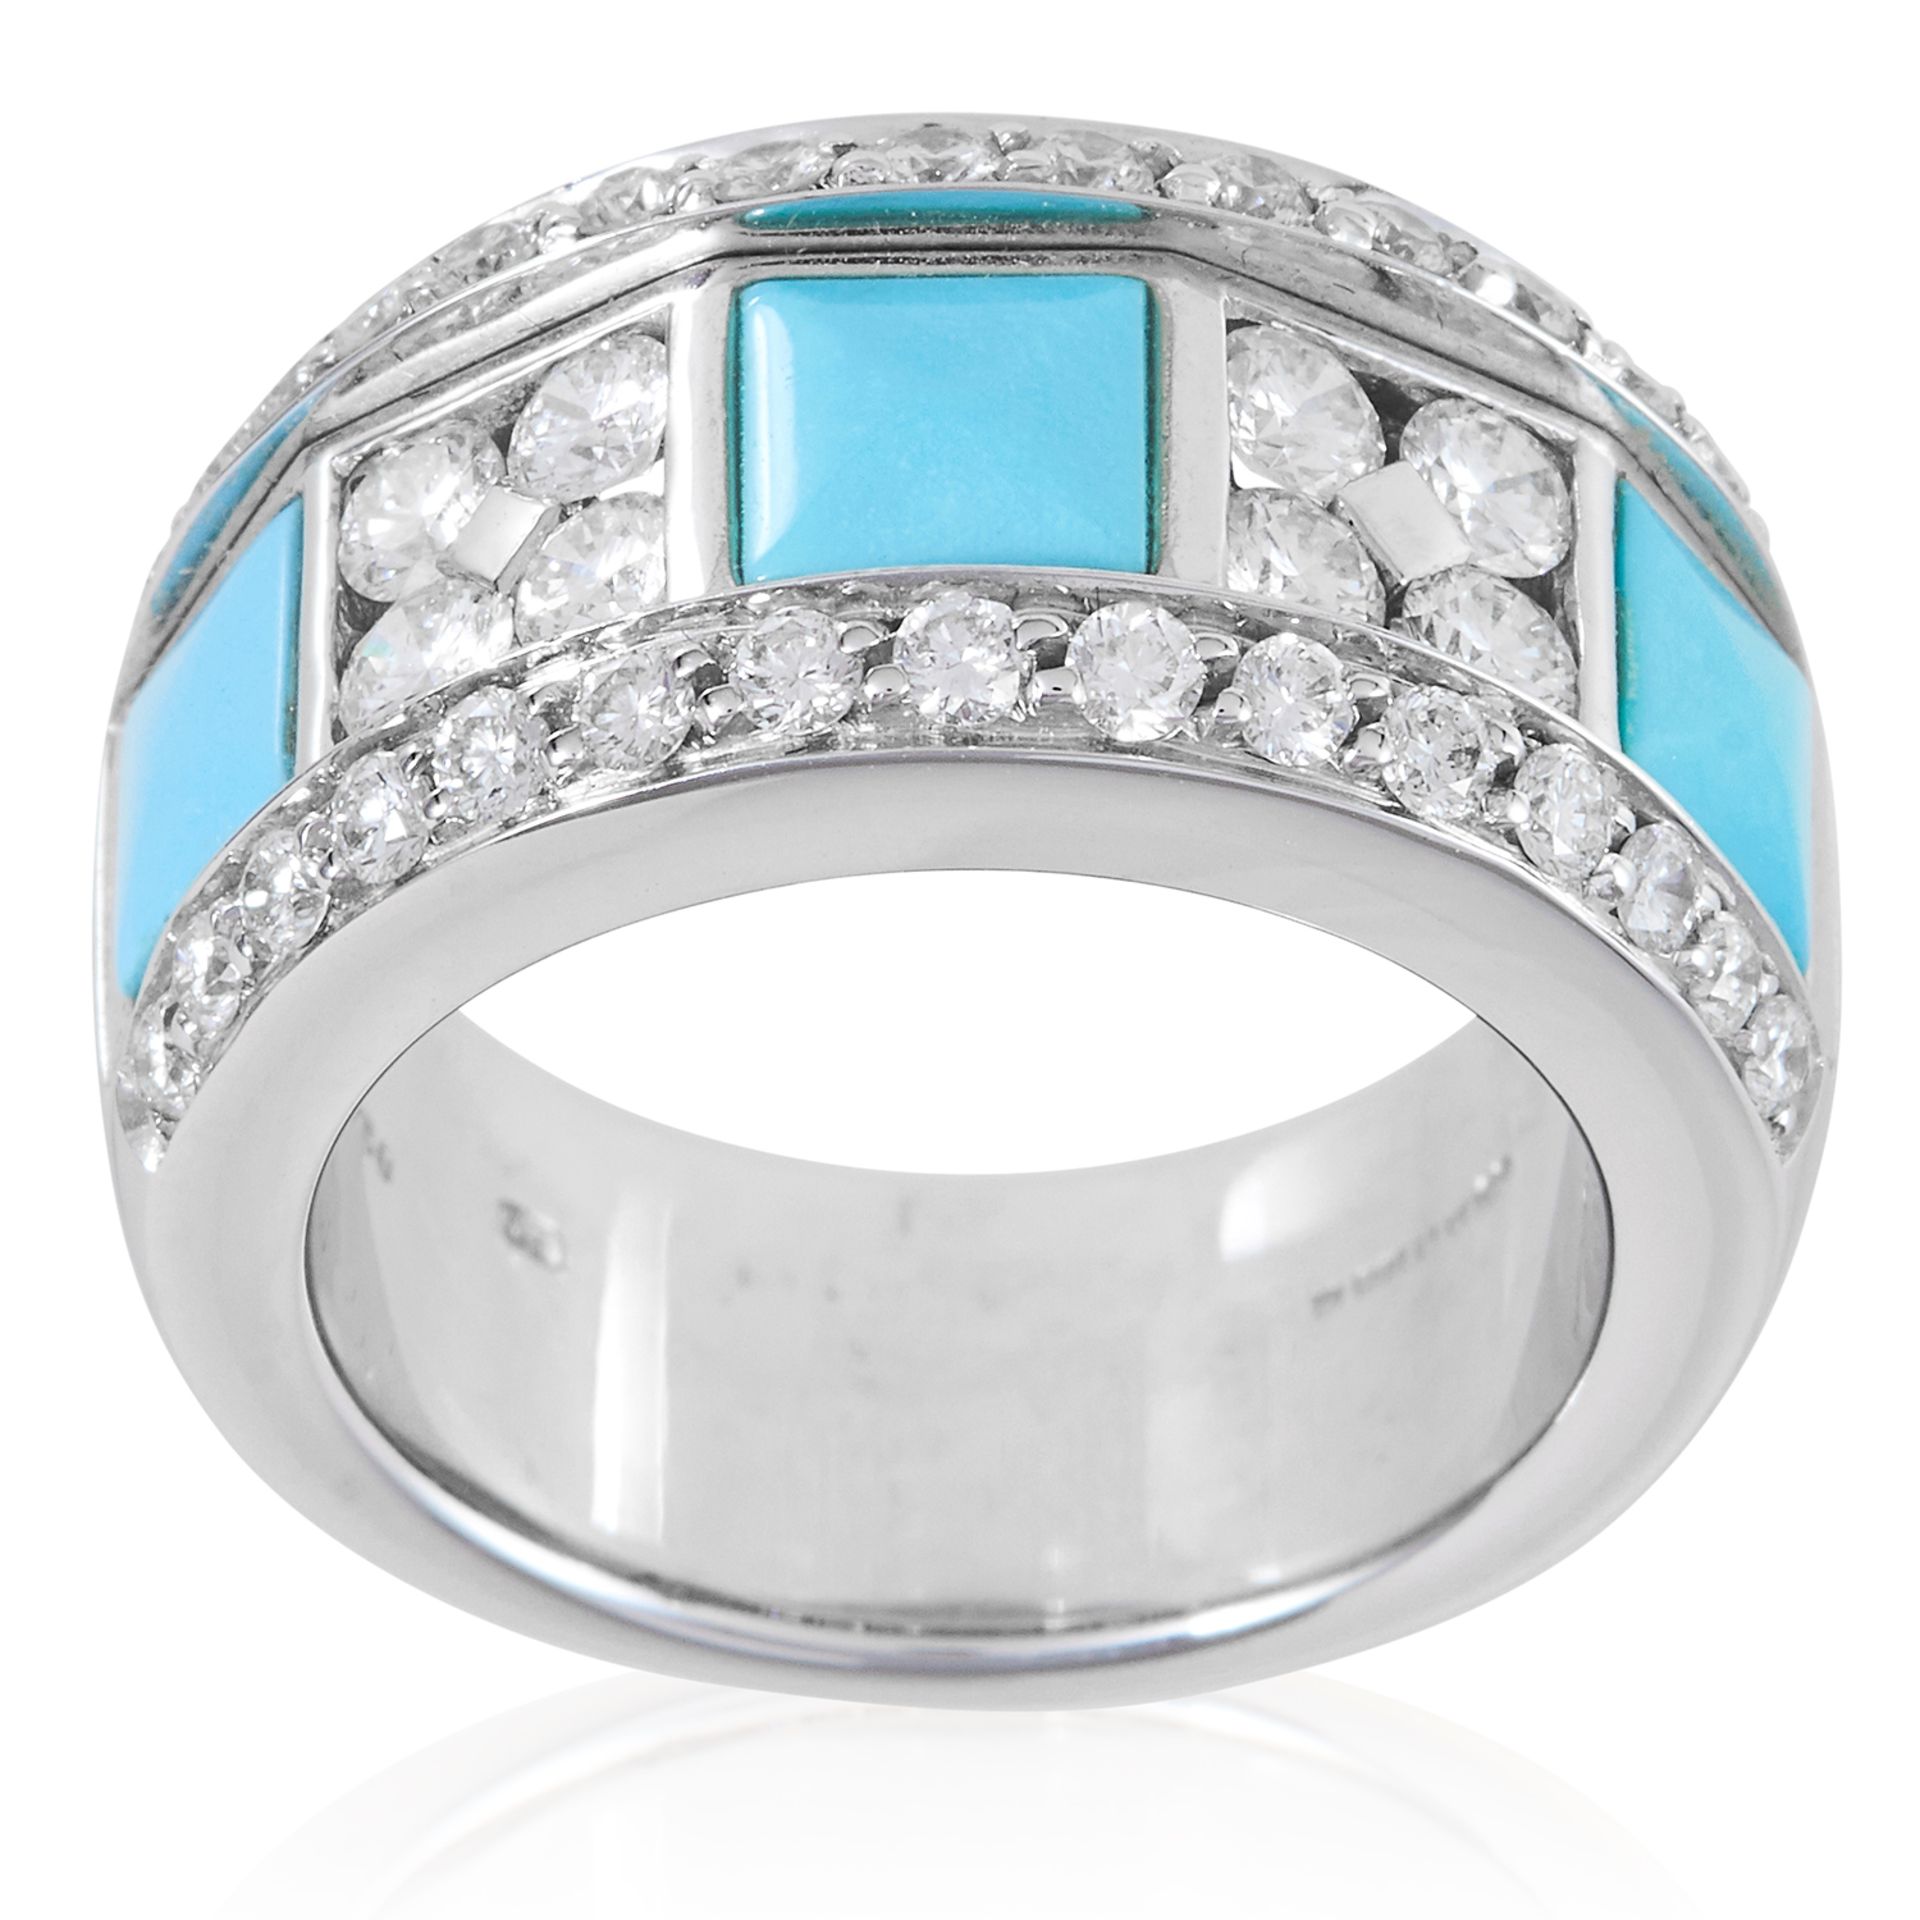 A TURQUOISE AND DIAMOND RING, PICCHIOTTI in 18ct white gold, set with alternating square turquoise